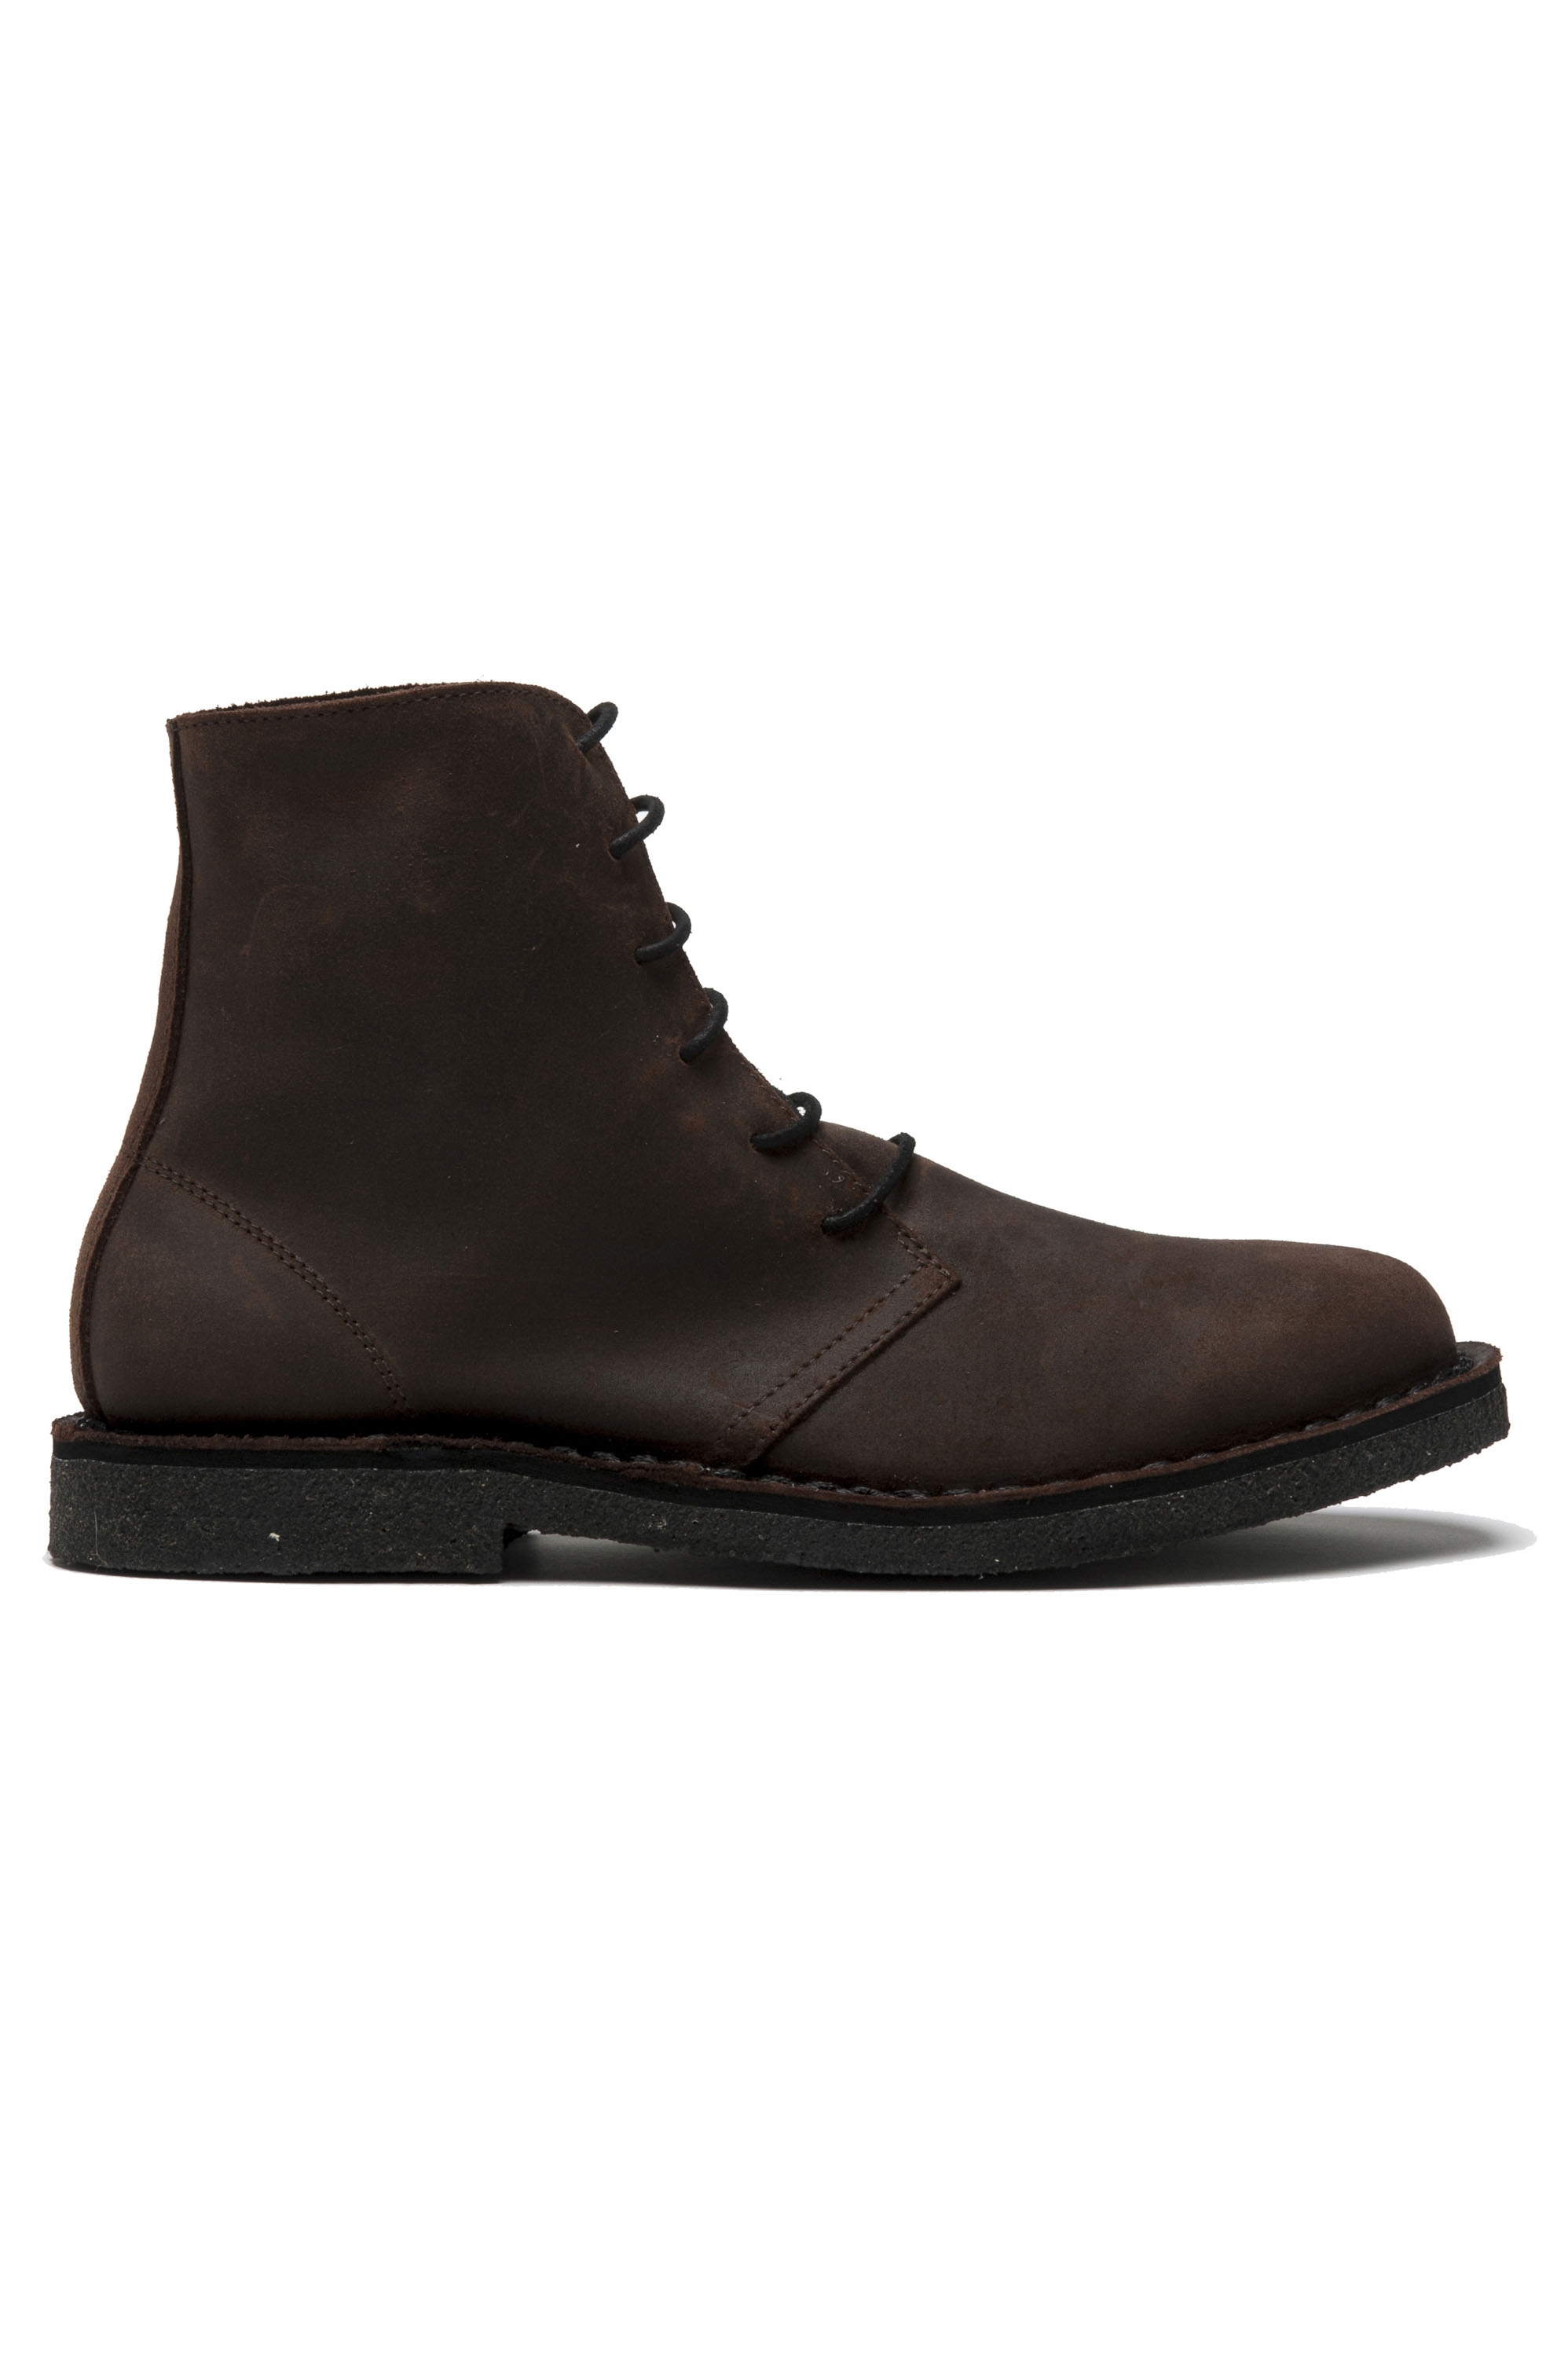 SBU 01509 Classic high top desert boots in brown oiled calfskin leather 01